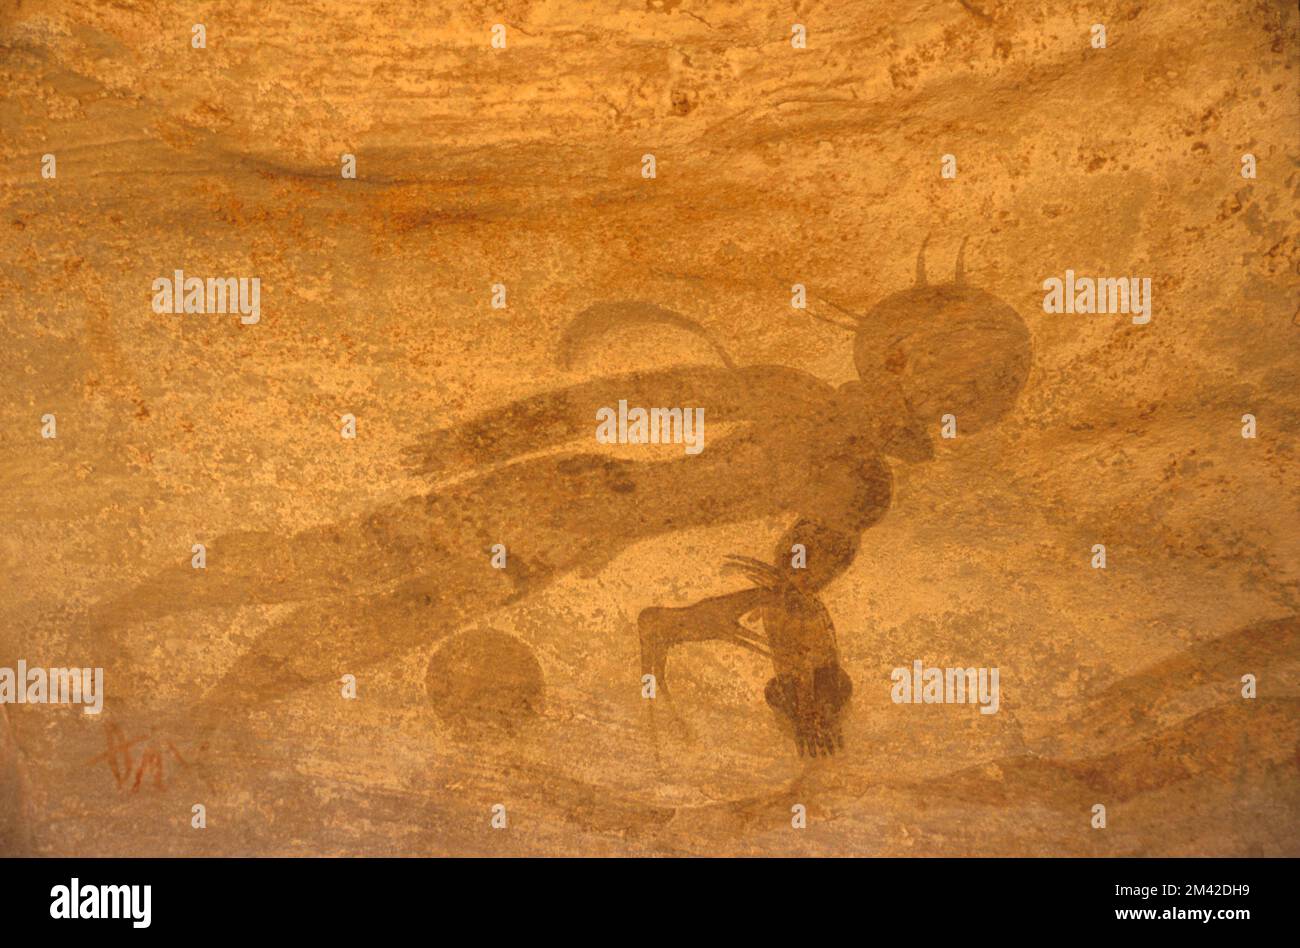 Neolithic rock painting of a human figure apparently swimming or floating, Tassili N'Ajjer, South Algeria, Sahara desert. Stock Photo